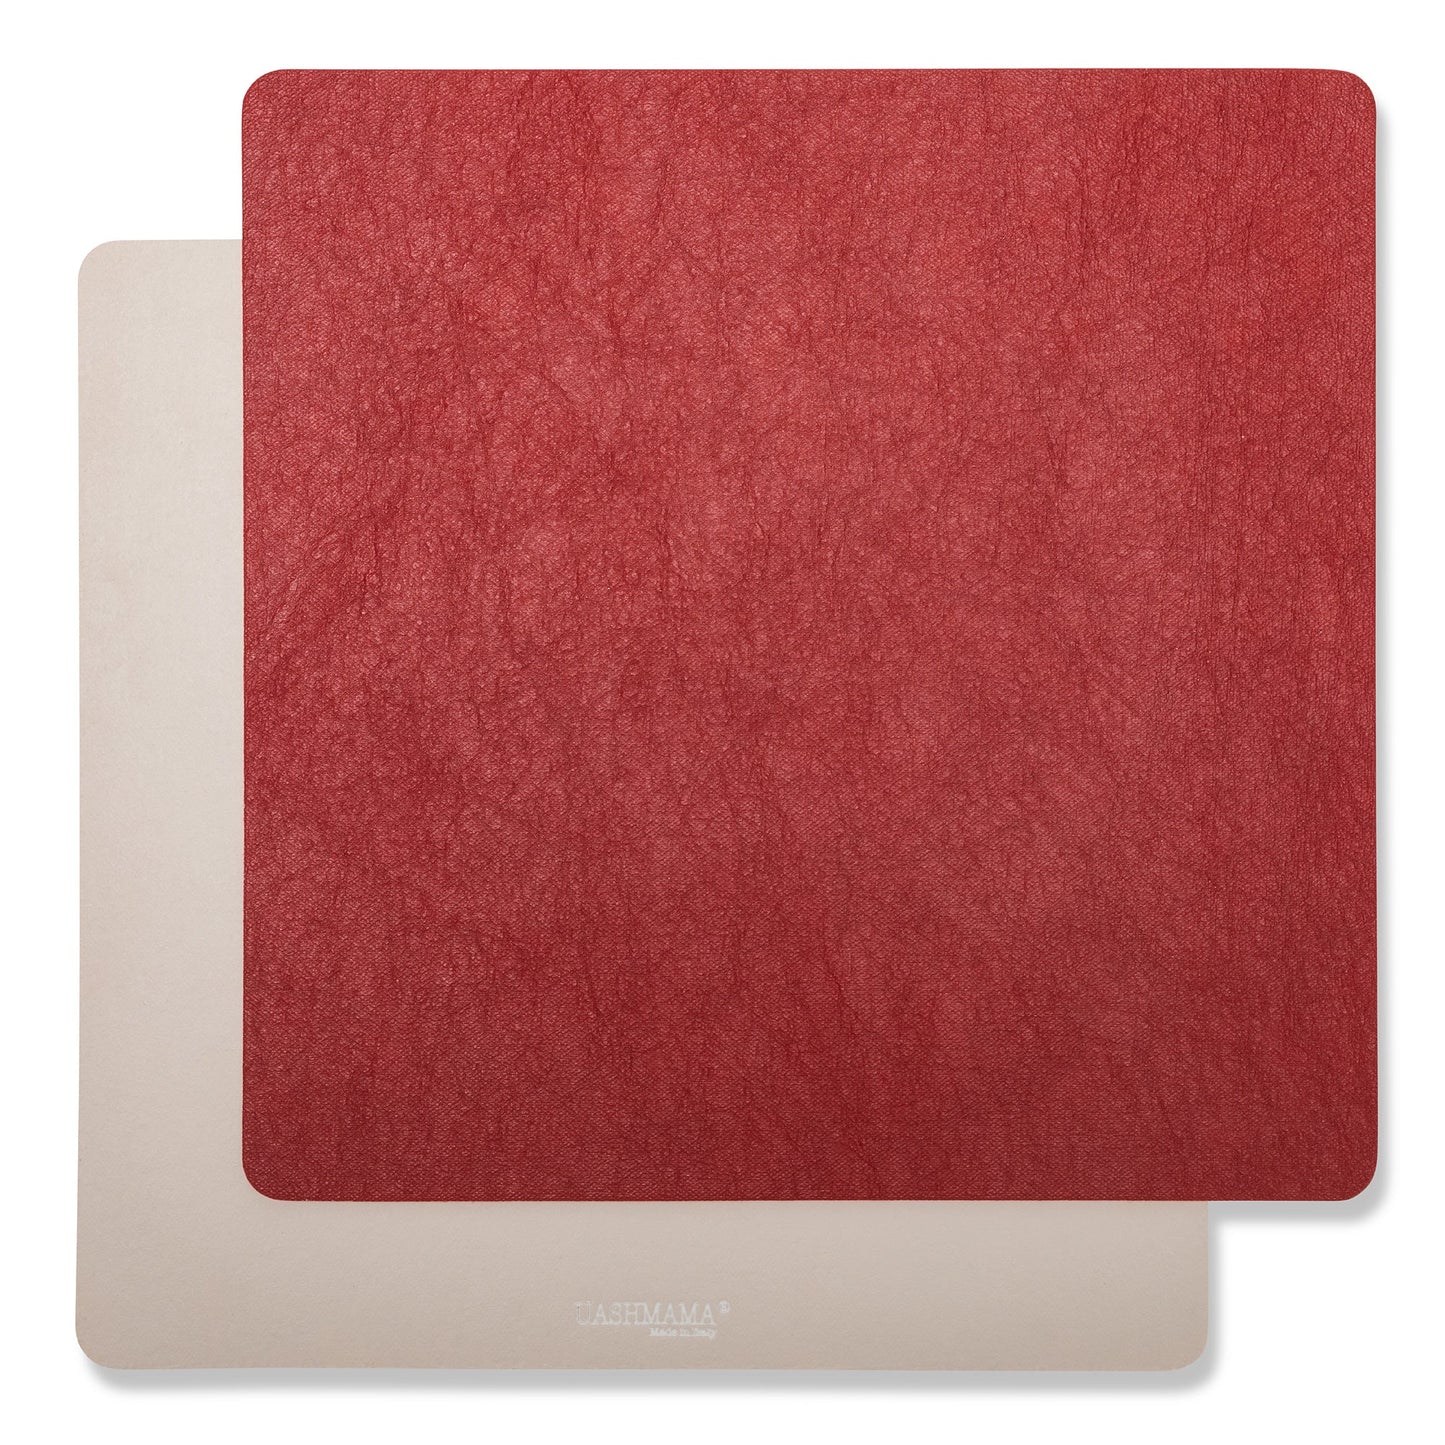 Two square washable paper placemats are shown one on top of the other. The one in the foreground is red and the one at the rear is beige.